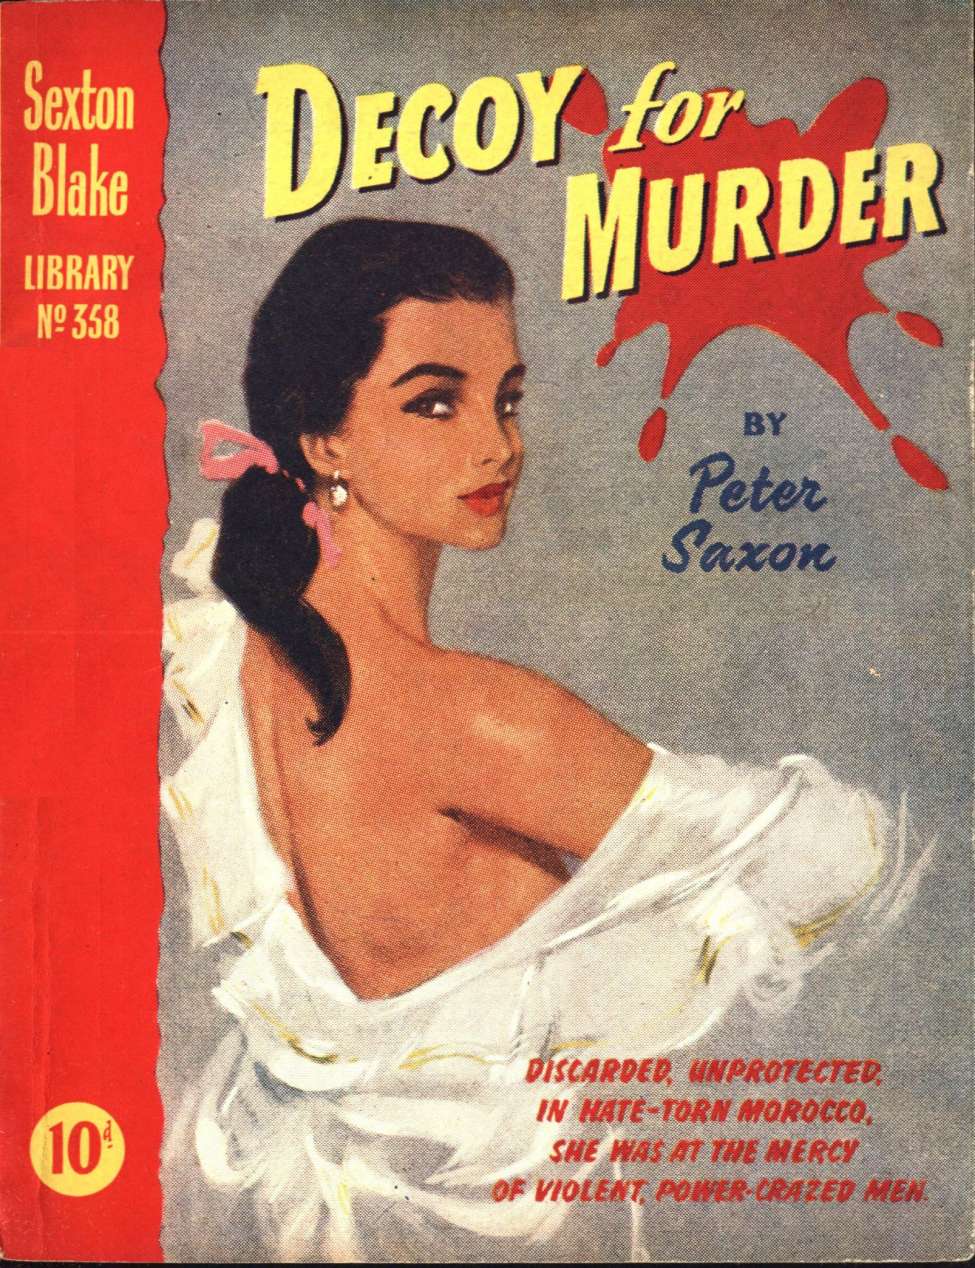 Comic Book Cover For Sexton Blake Library S3 358 - Decoy for Murder